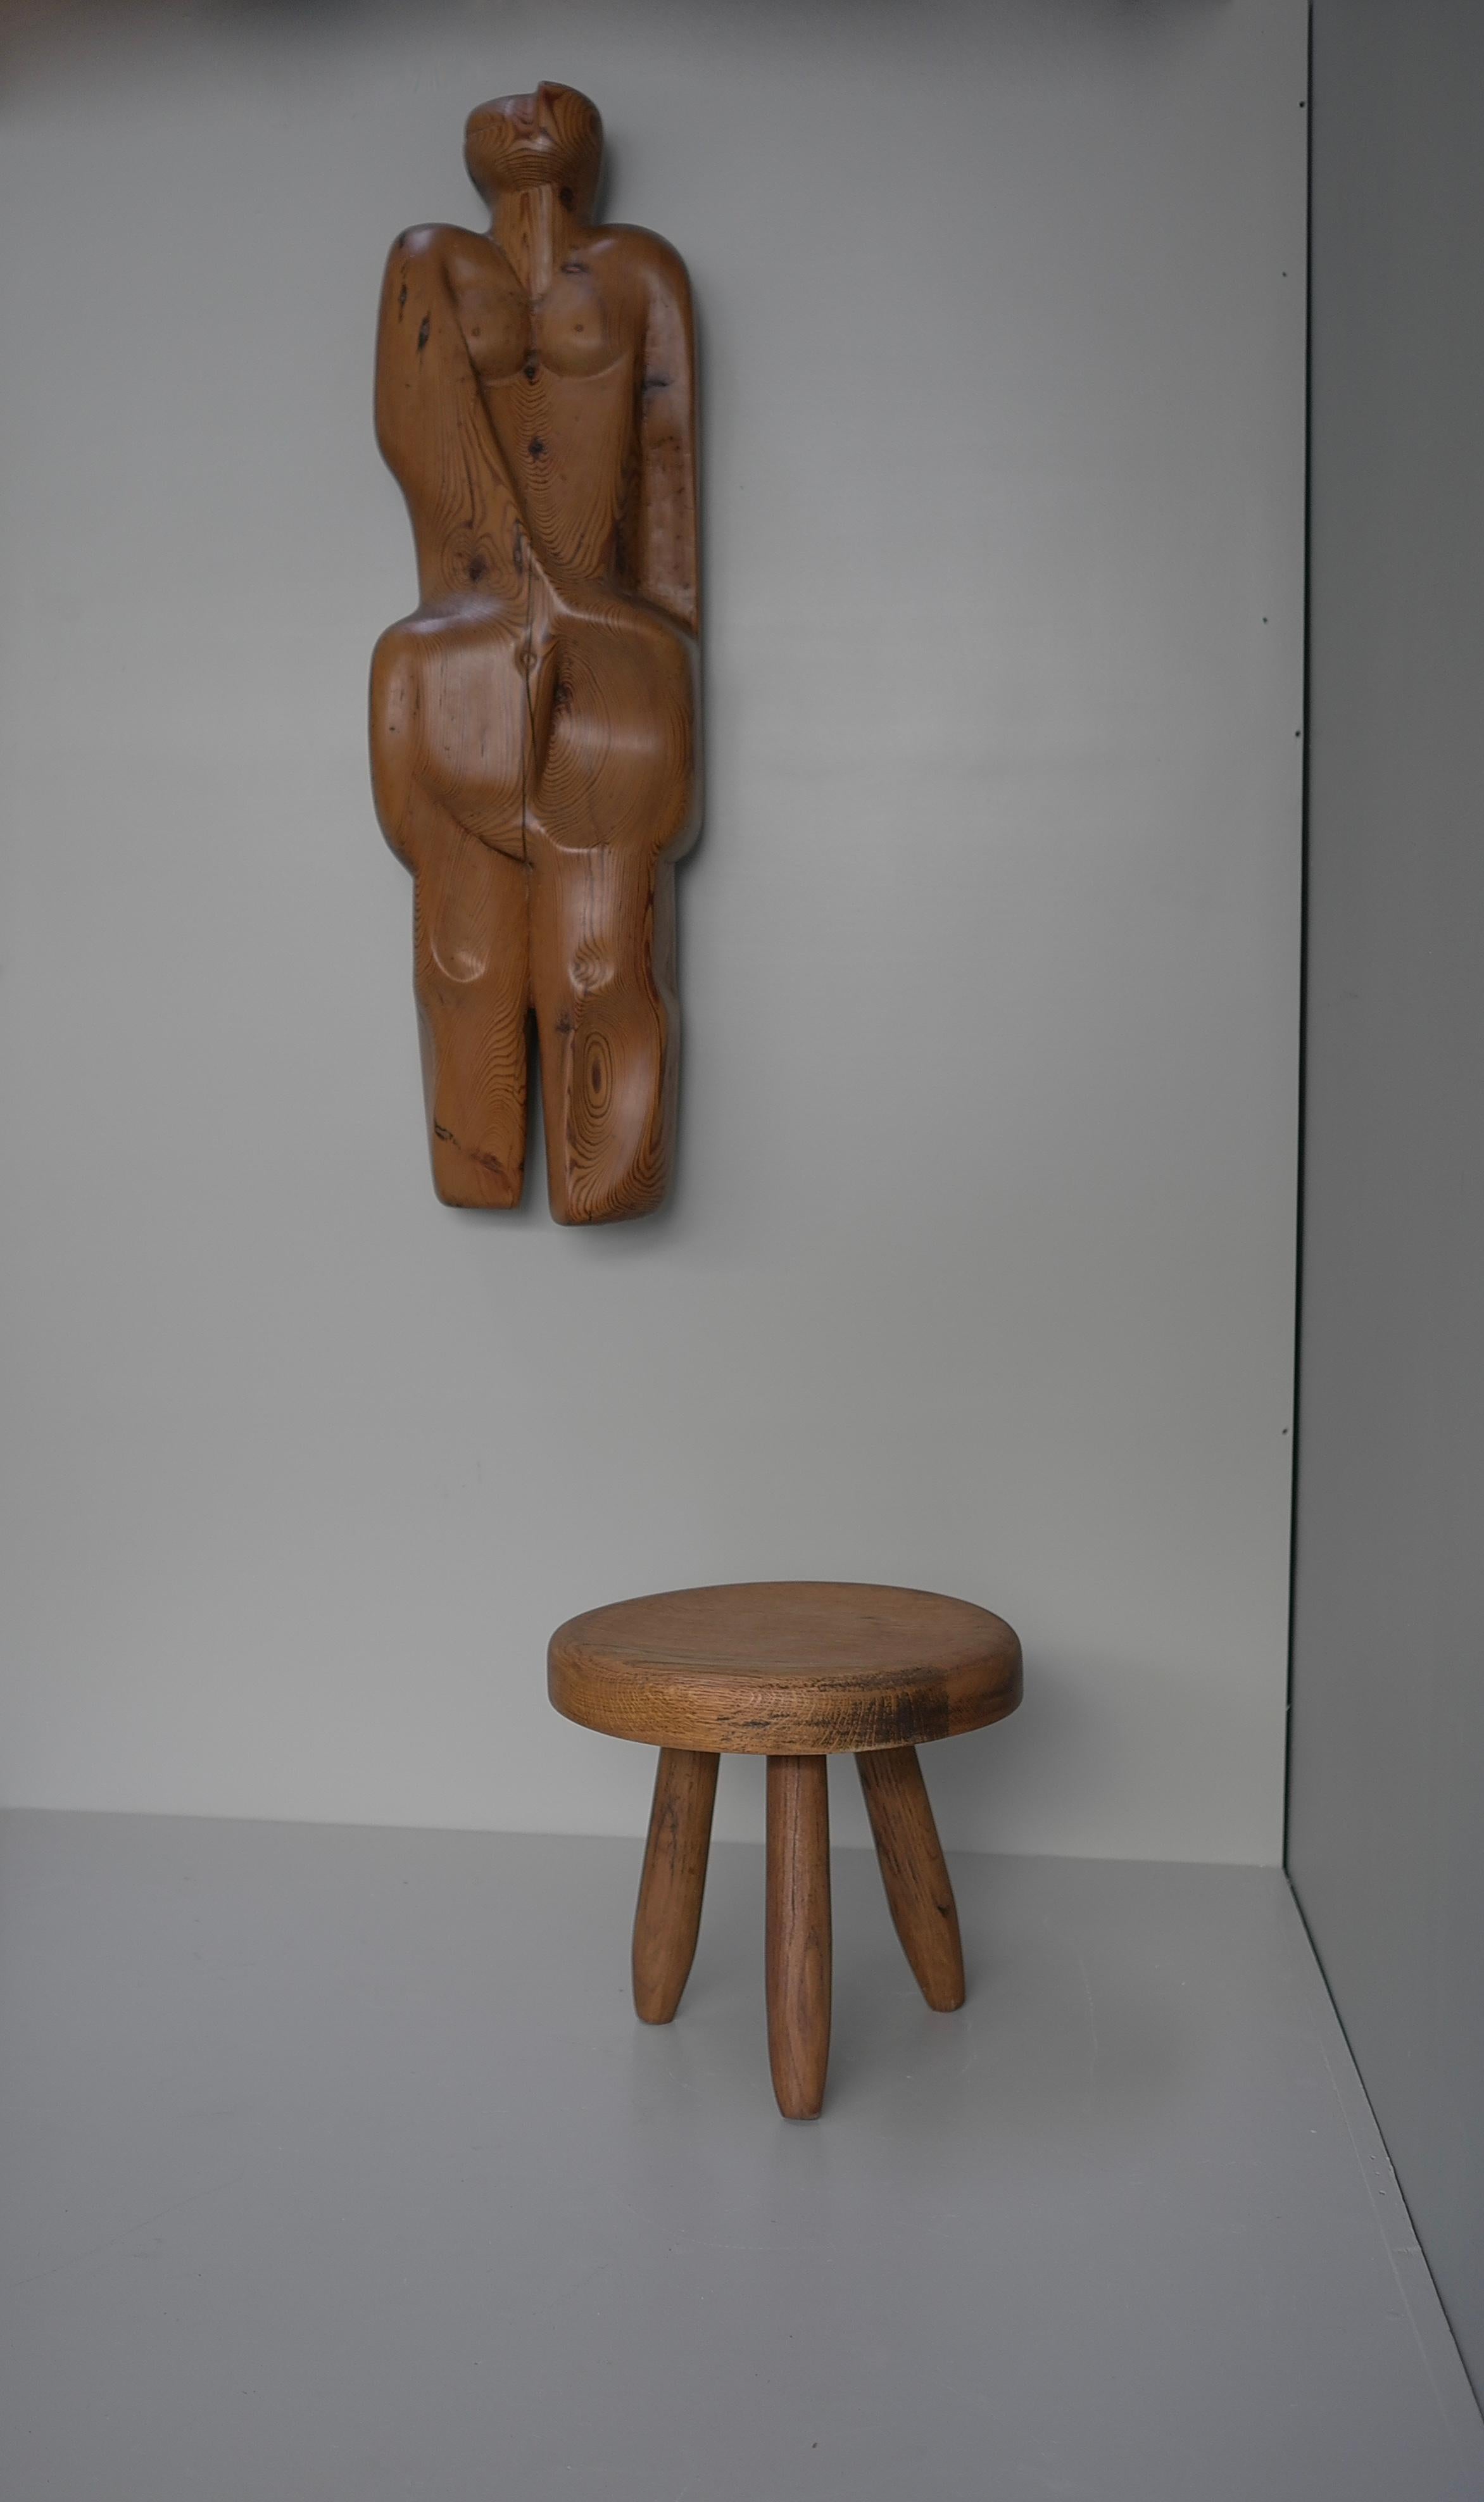 Dutch Abstract Wooden Wall Art , Women Figure by Cor Dam, Delft The Netherlands 1958 For Sale